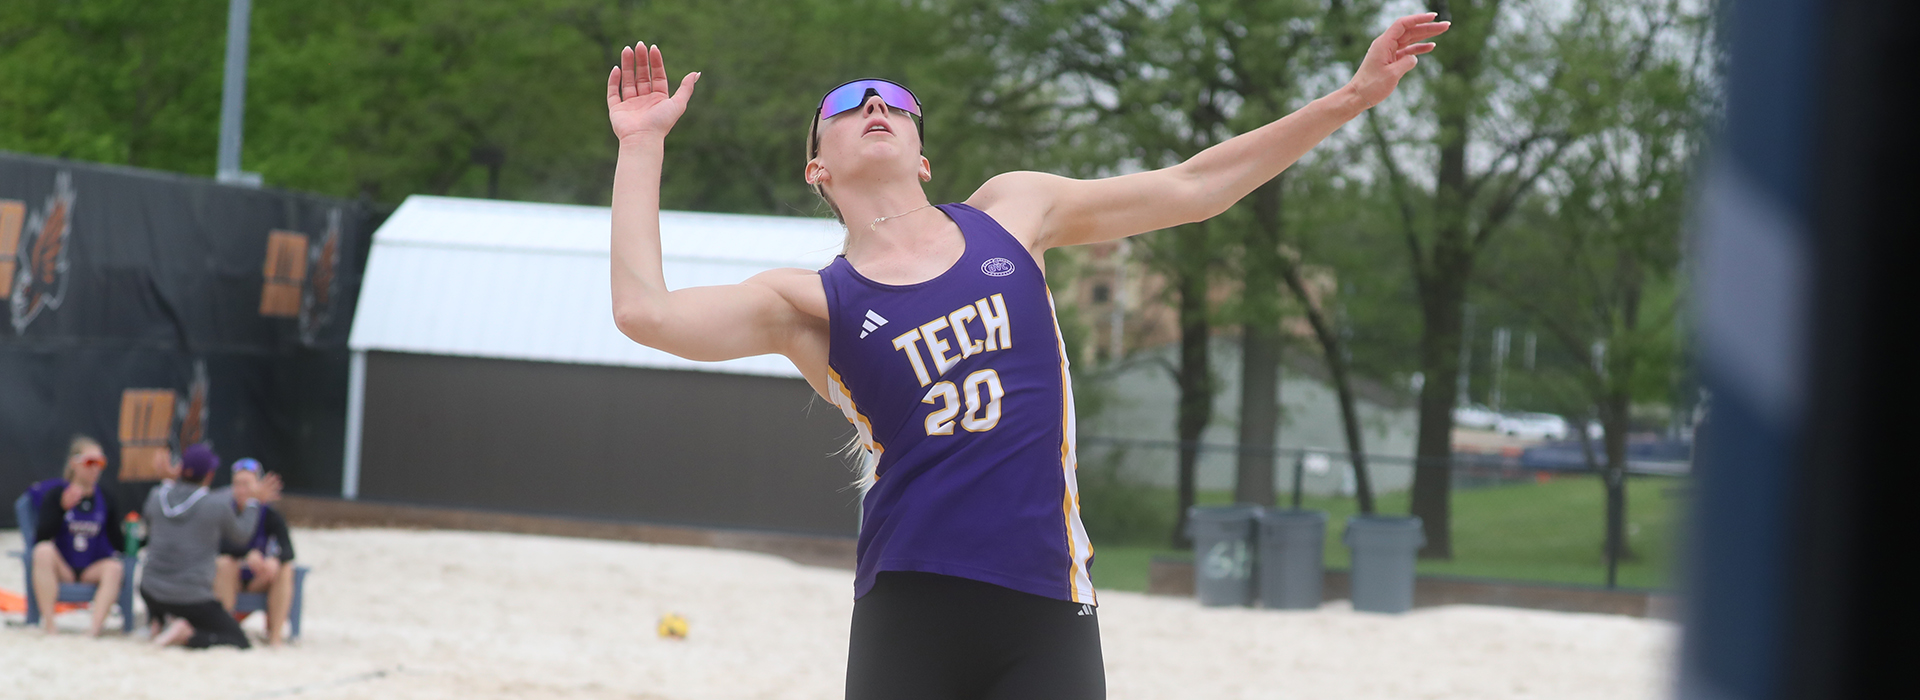 Tech falls in pair of 4-1 bouts on day one of final OVC weekend